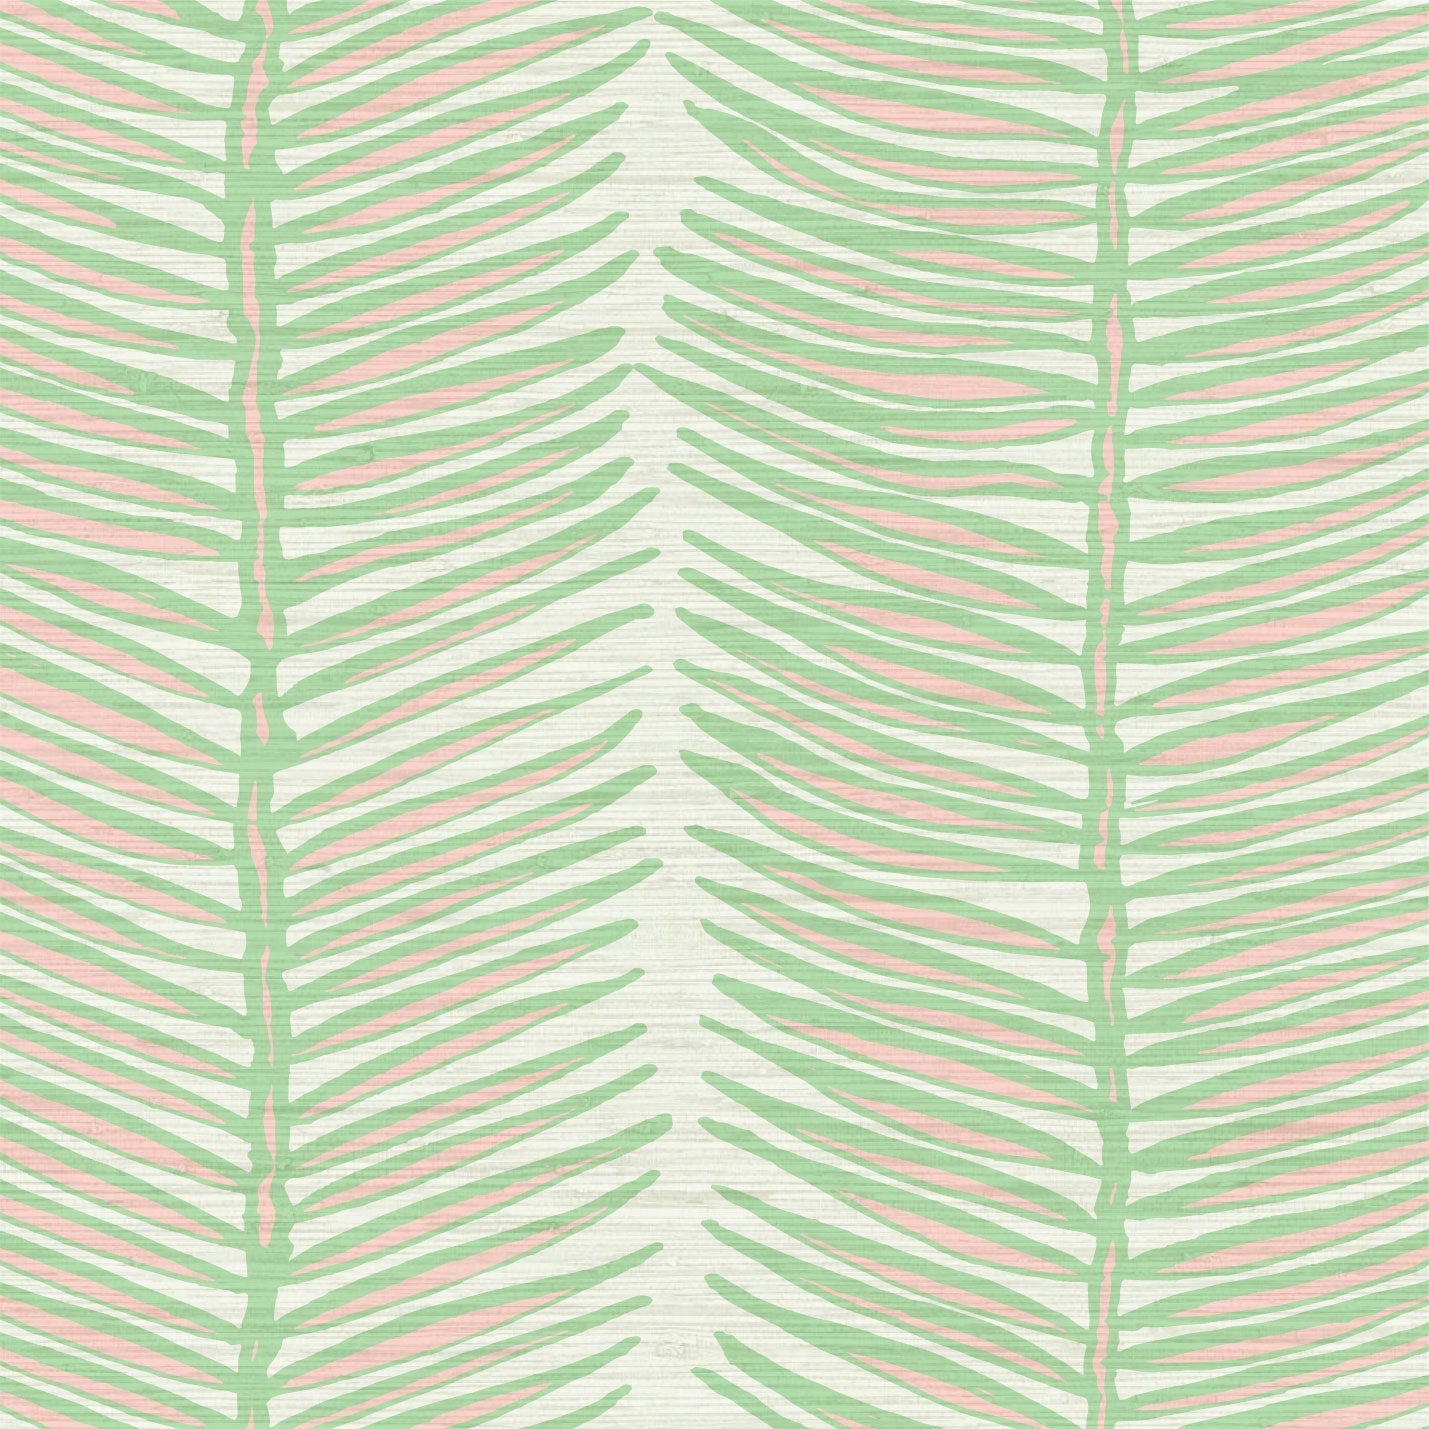 Grasscloth wallpaper Natural Textured Eco-Friendly Non-toxic High-quality Sustainable Interior Design Bold Custom Tailor-made Retro chic Tropical Jungle Coastal Garden Seaside Seashore Waterfront Vacation home styling Retreat Relaxed beach vibes Beach cottage Shoreline Oceanfront Nautical Cabana preppy palm fern leaf vertical stripe pastel pink light pale mint green